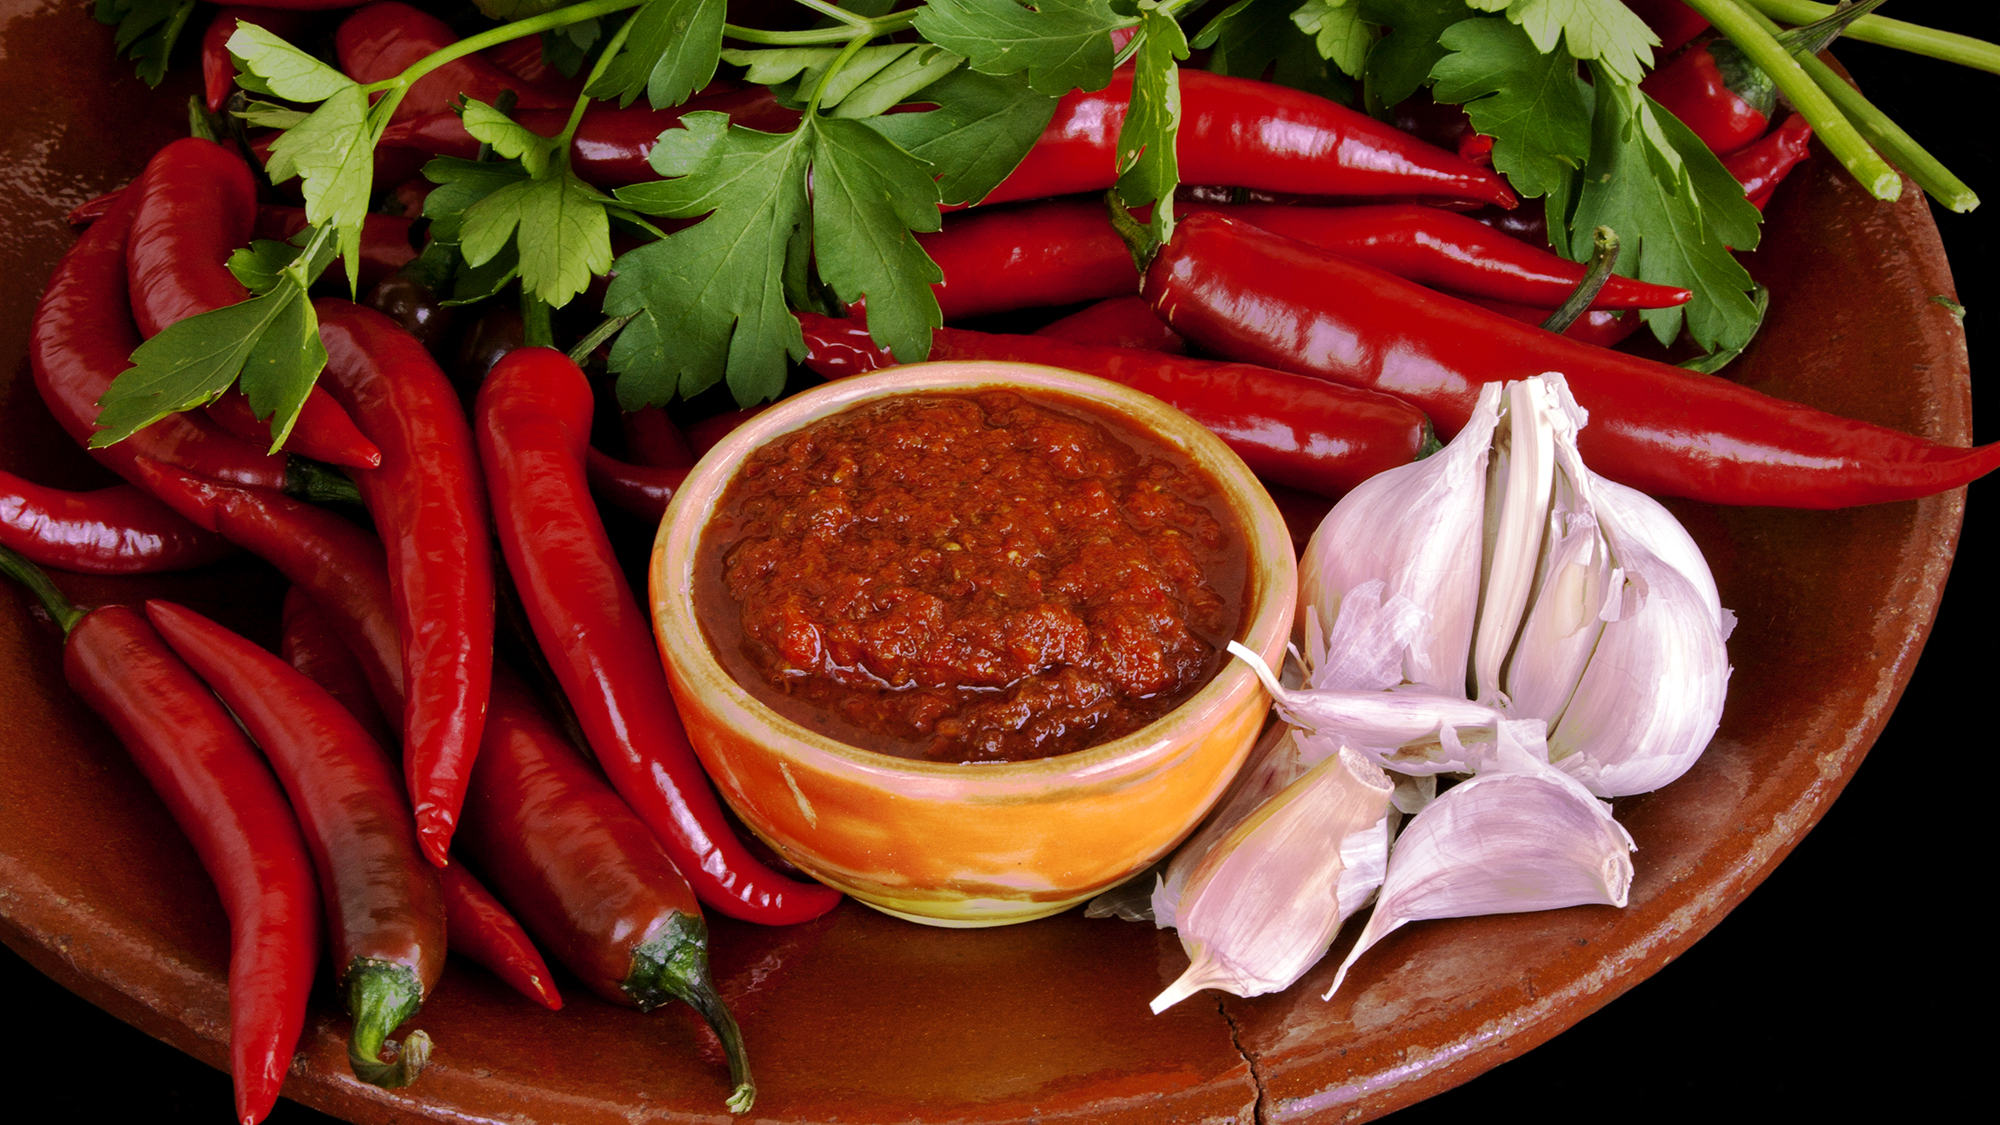 Eating spicy food probably won’t hurt you in the long run